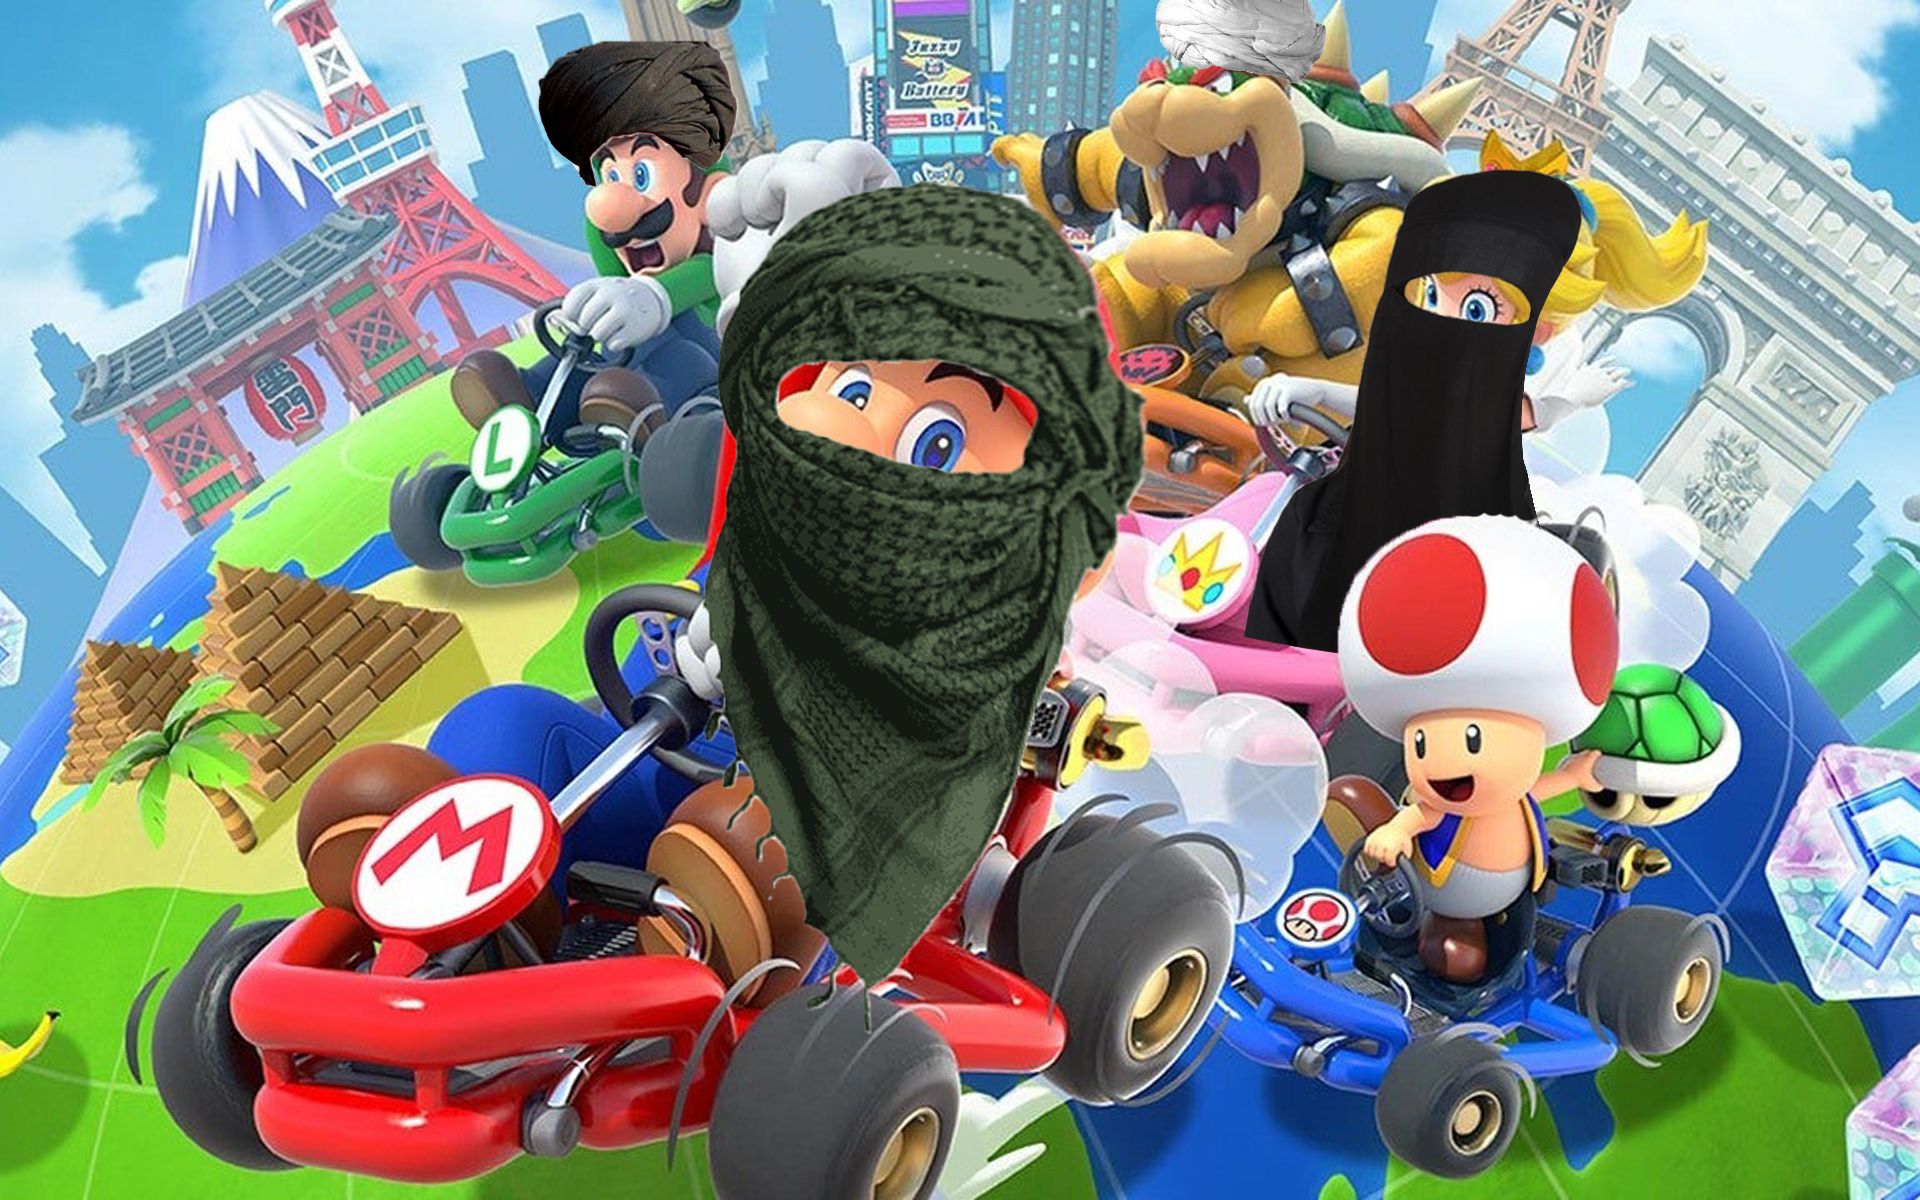 New Mario Kart Gimmick Allows Characters To Convert To Radical Islam